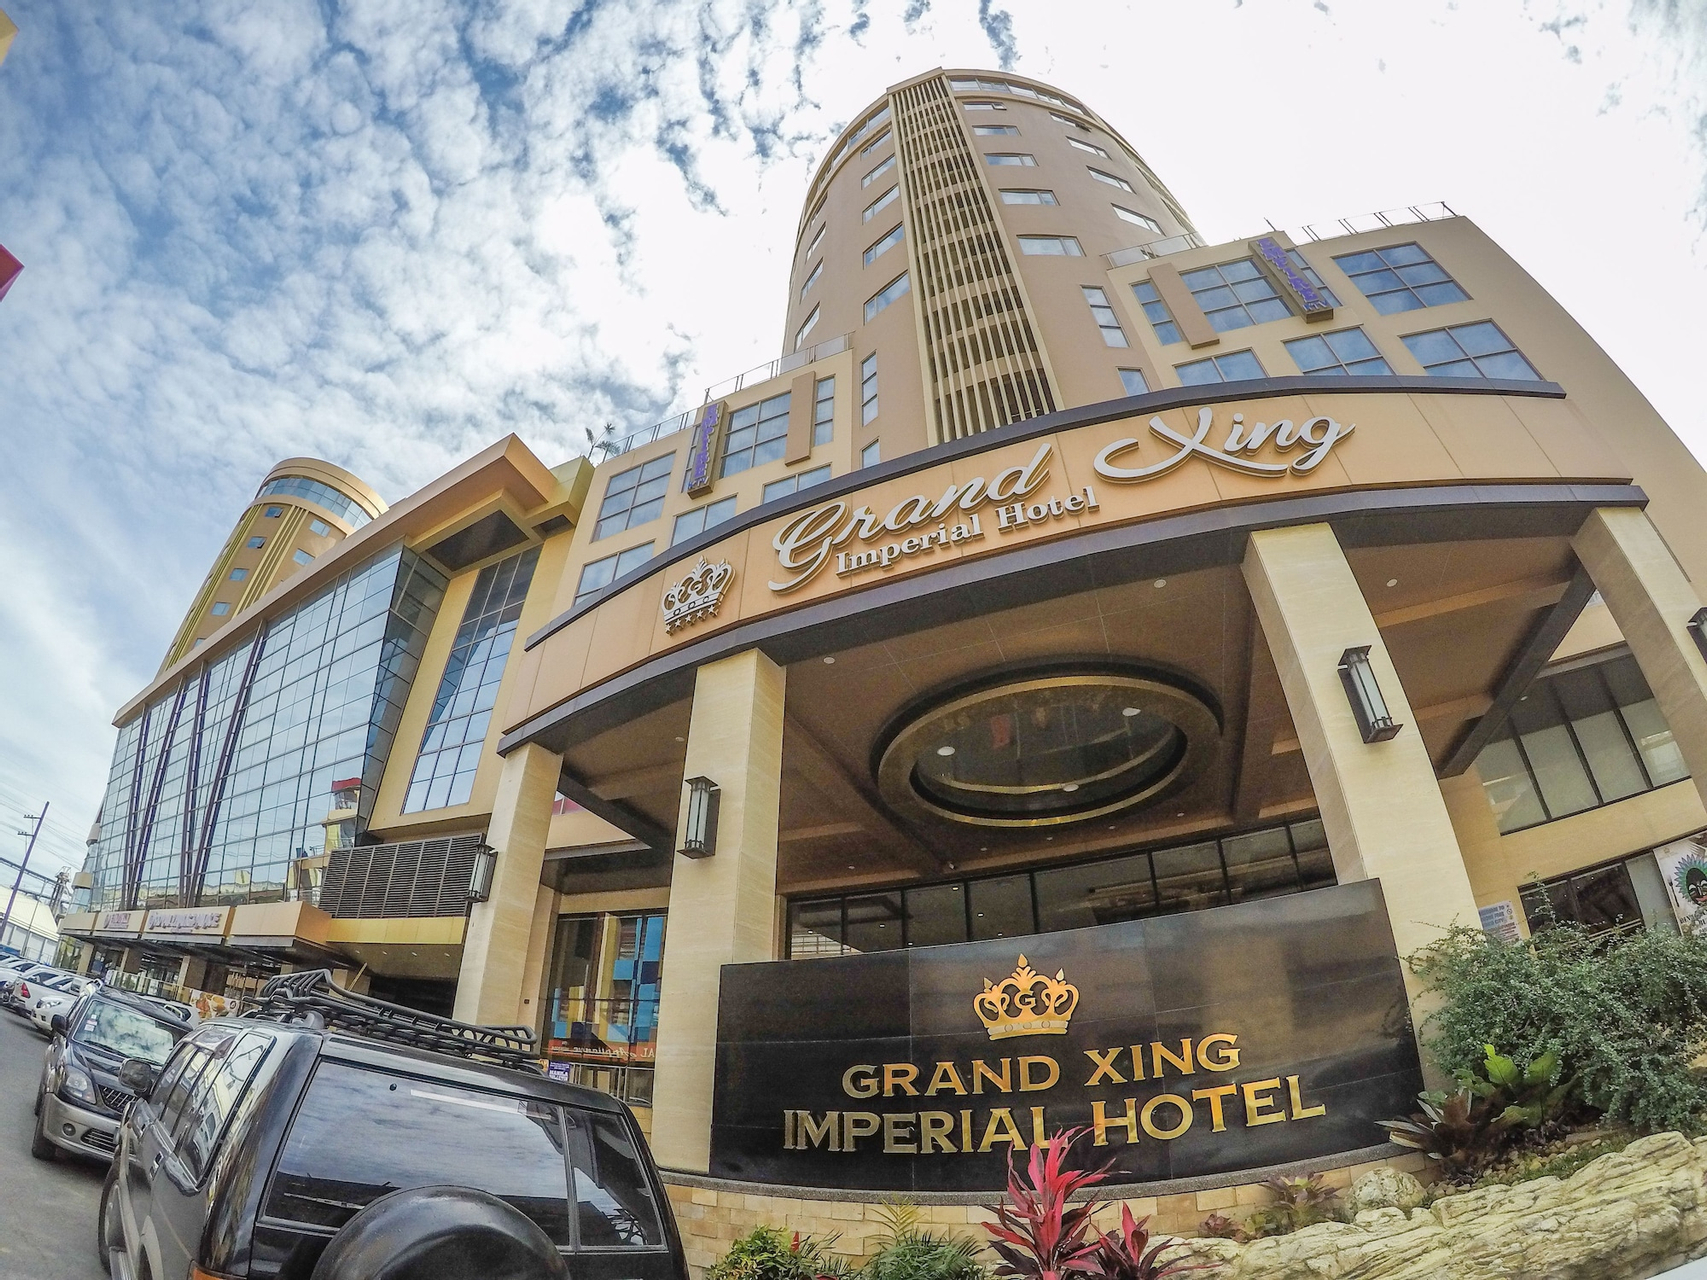 Exterior & Views 1, Grand Xing Imperial Hotel, Iloilo City